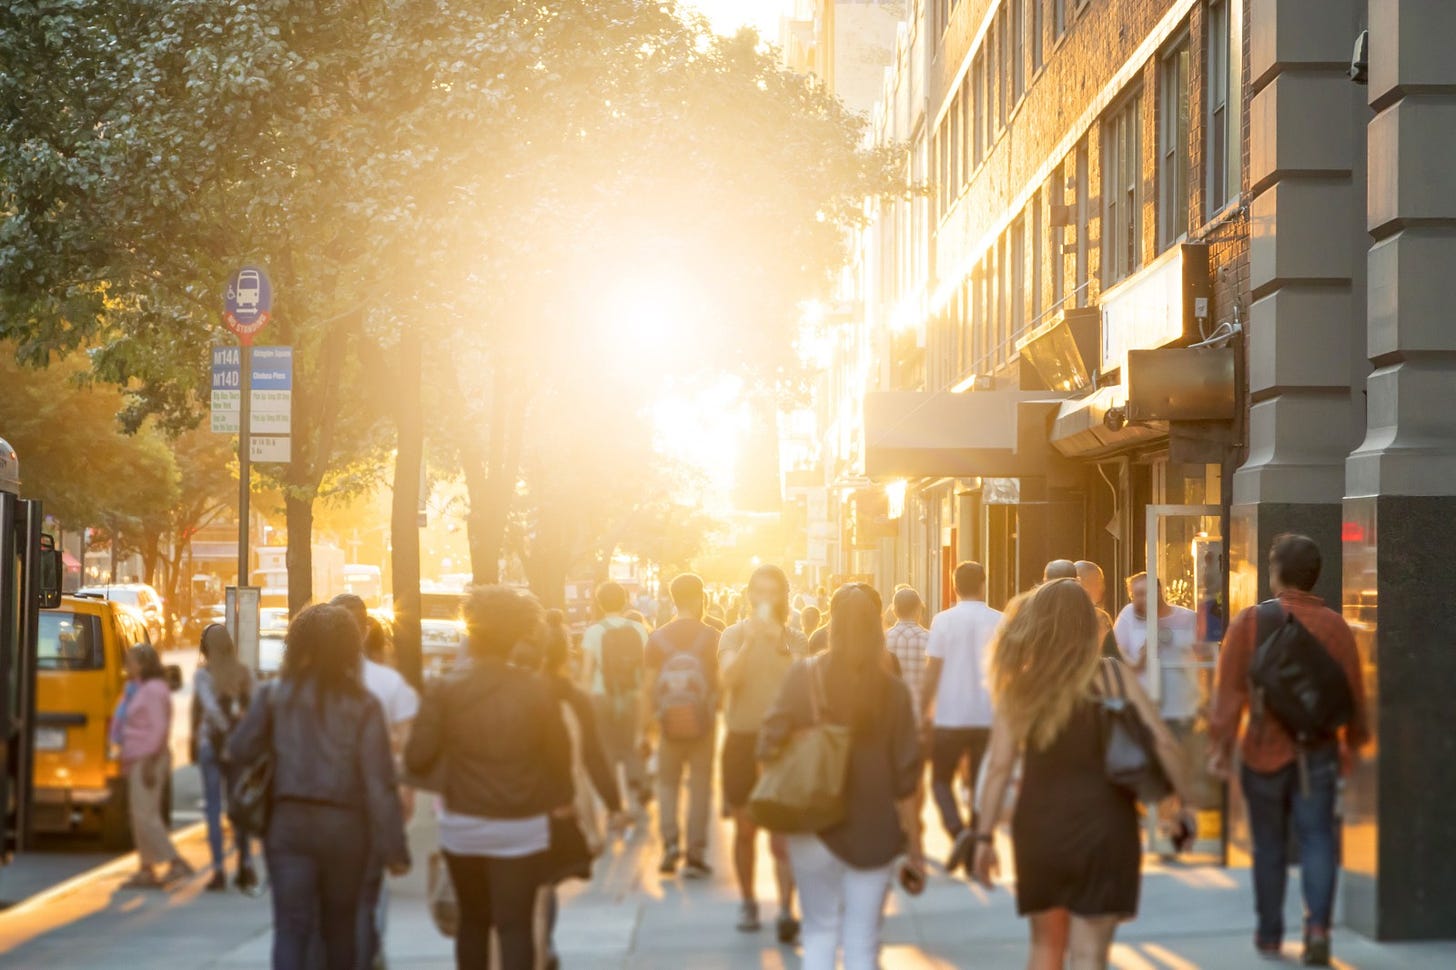 Many people walking on a city street, with sunlight bursting through a tree